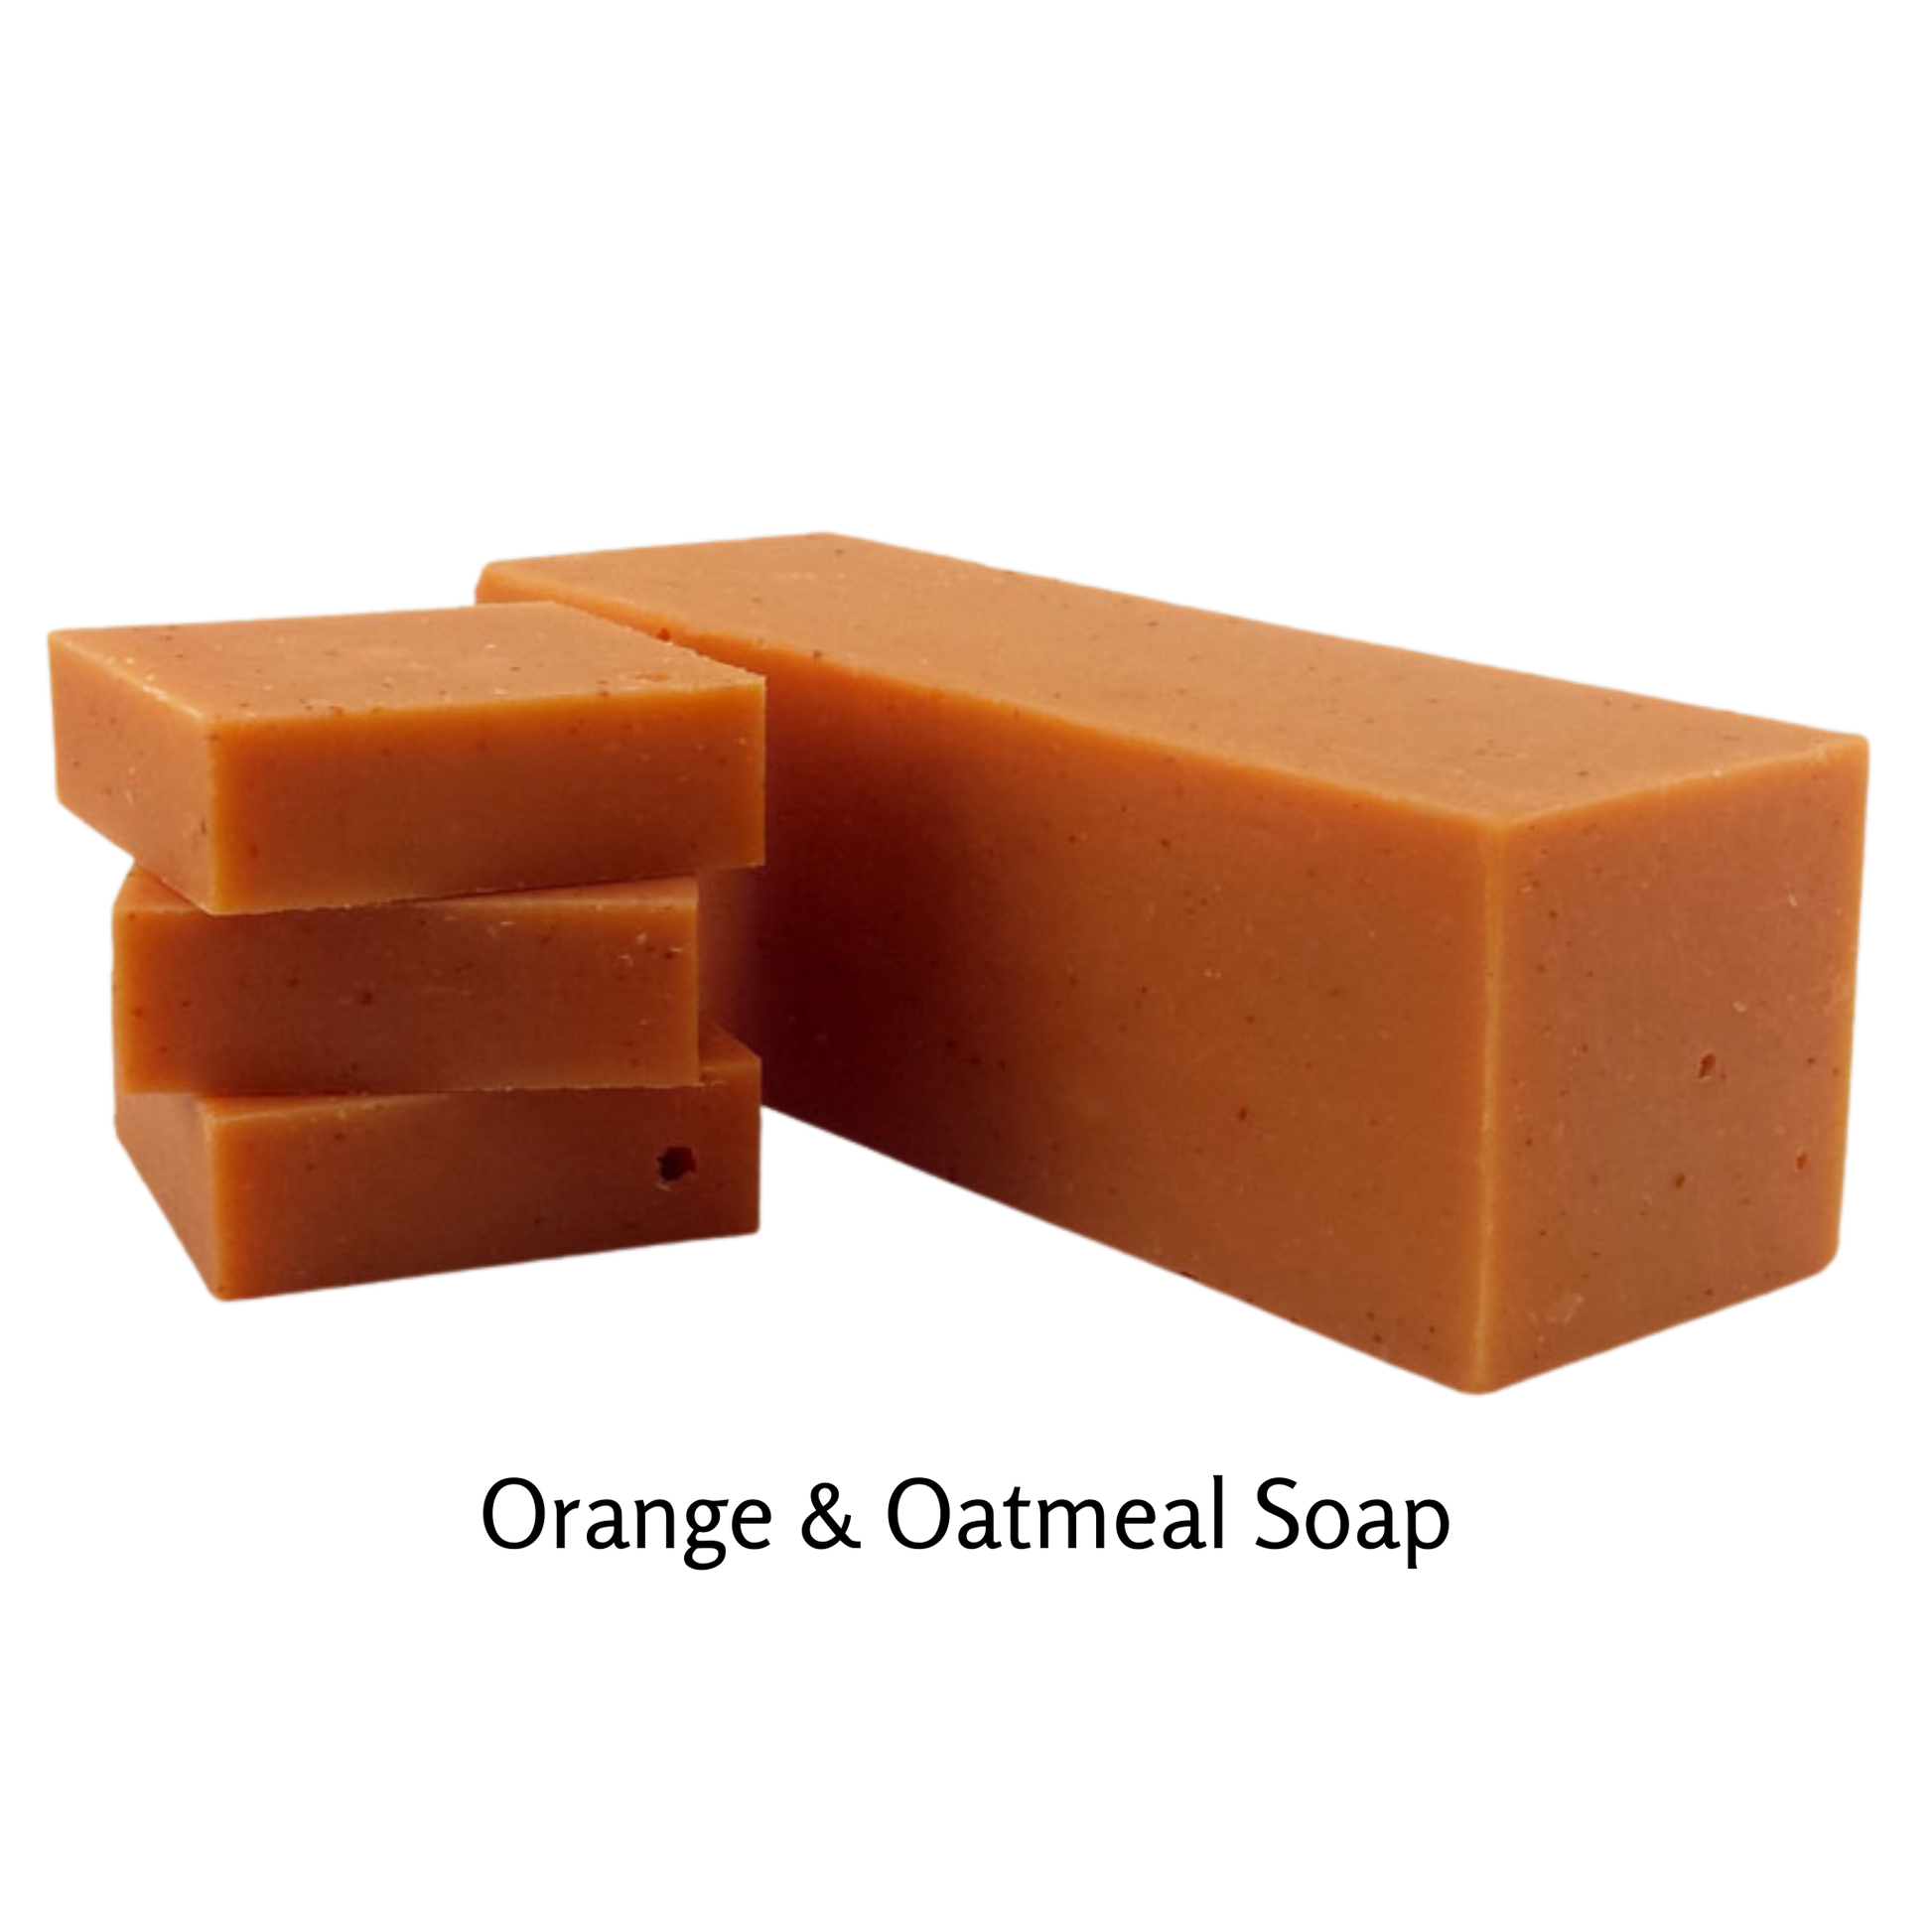 Oatmeal soap can help control eczema and psoriasis, and can also moisturize the skin and relieve itching and irritation. It can also reduce pores, so it can be part of an effective skincare routine for treating and preventing acne. Orange soap can rejuvenate and soothe the skin. 4.5 oz